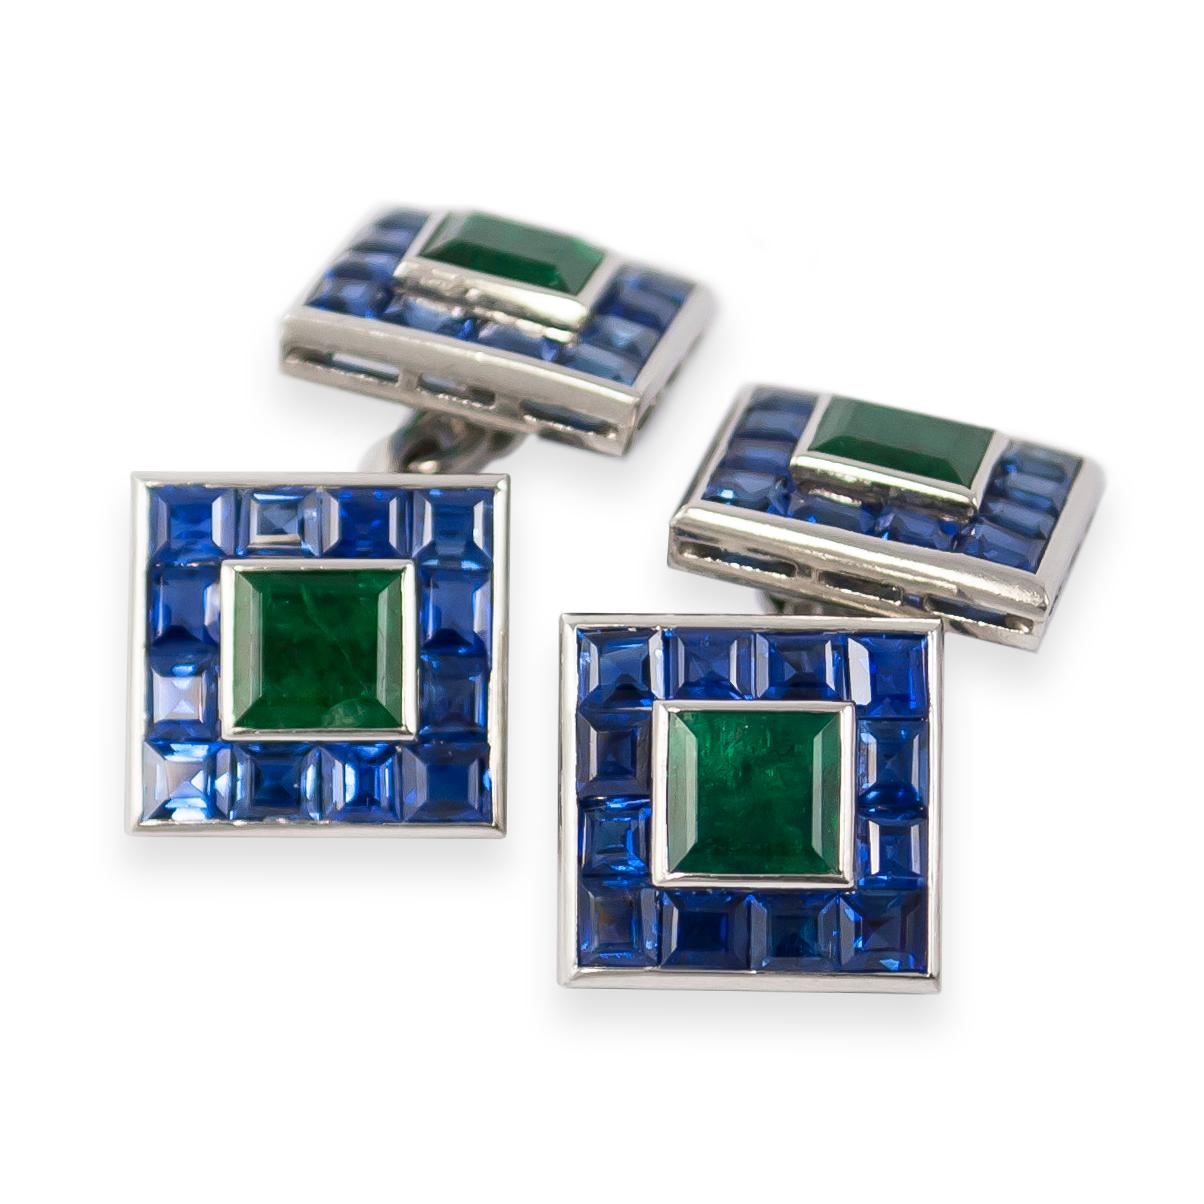 This exquisite cuff link and stud set are a one-of-a kind execution from the Art Deco era! Featuring 96 carre cut sapphires and seven, square, emeralds = 4.00 carat total weight, these flexible cuff links are essence of sophisticated.
With hand-cut